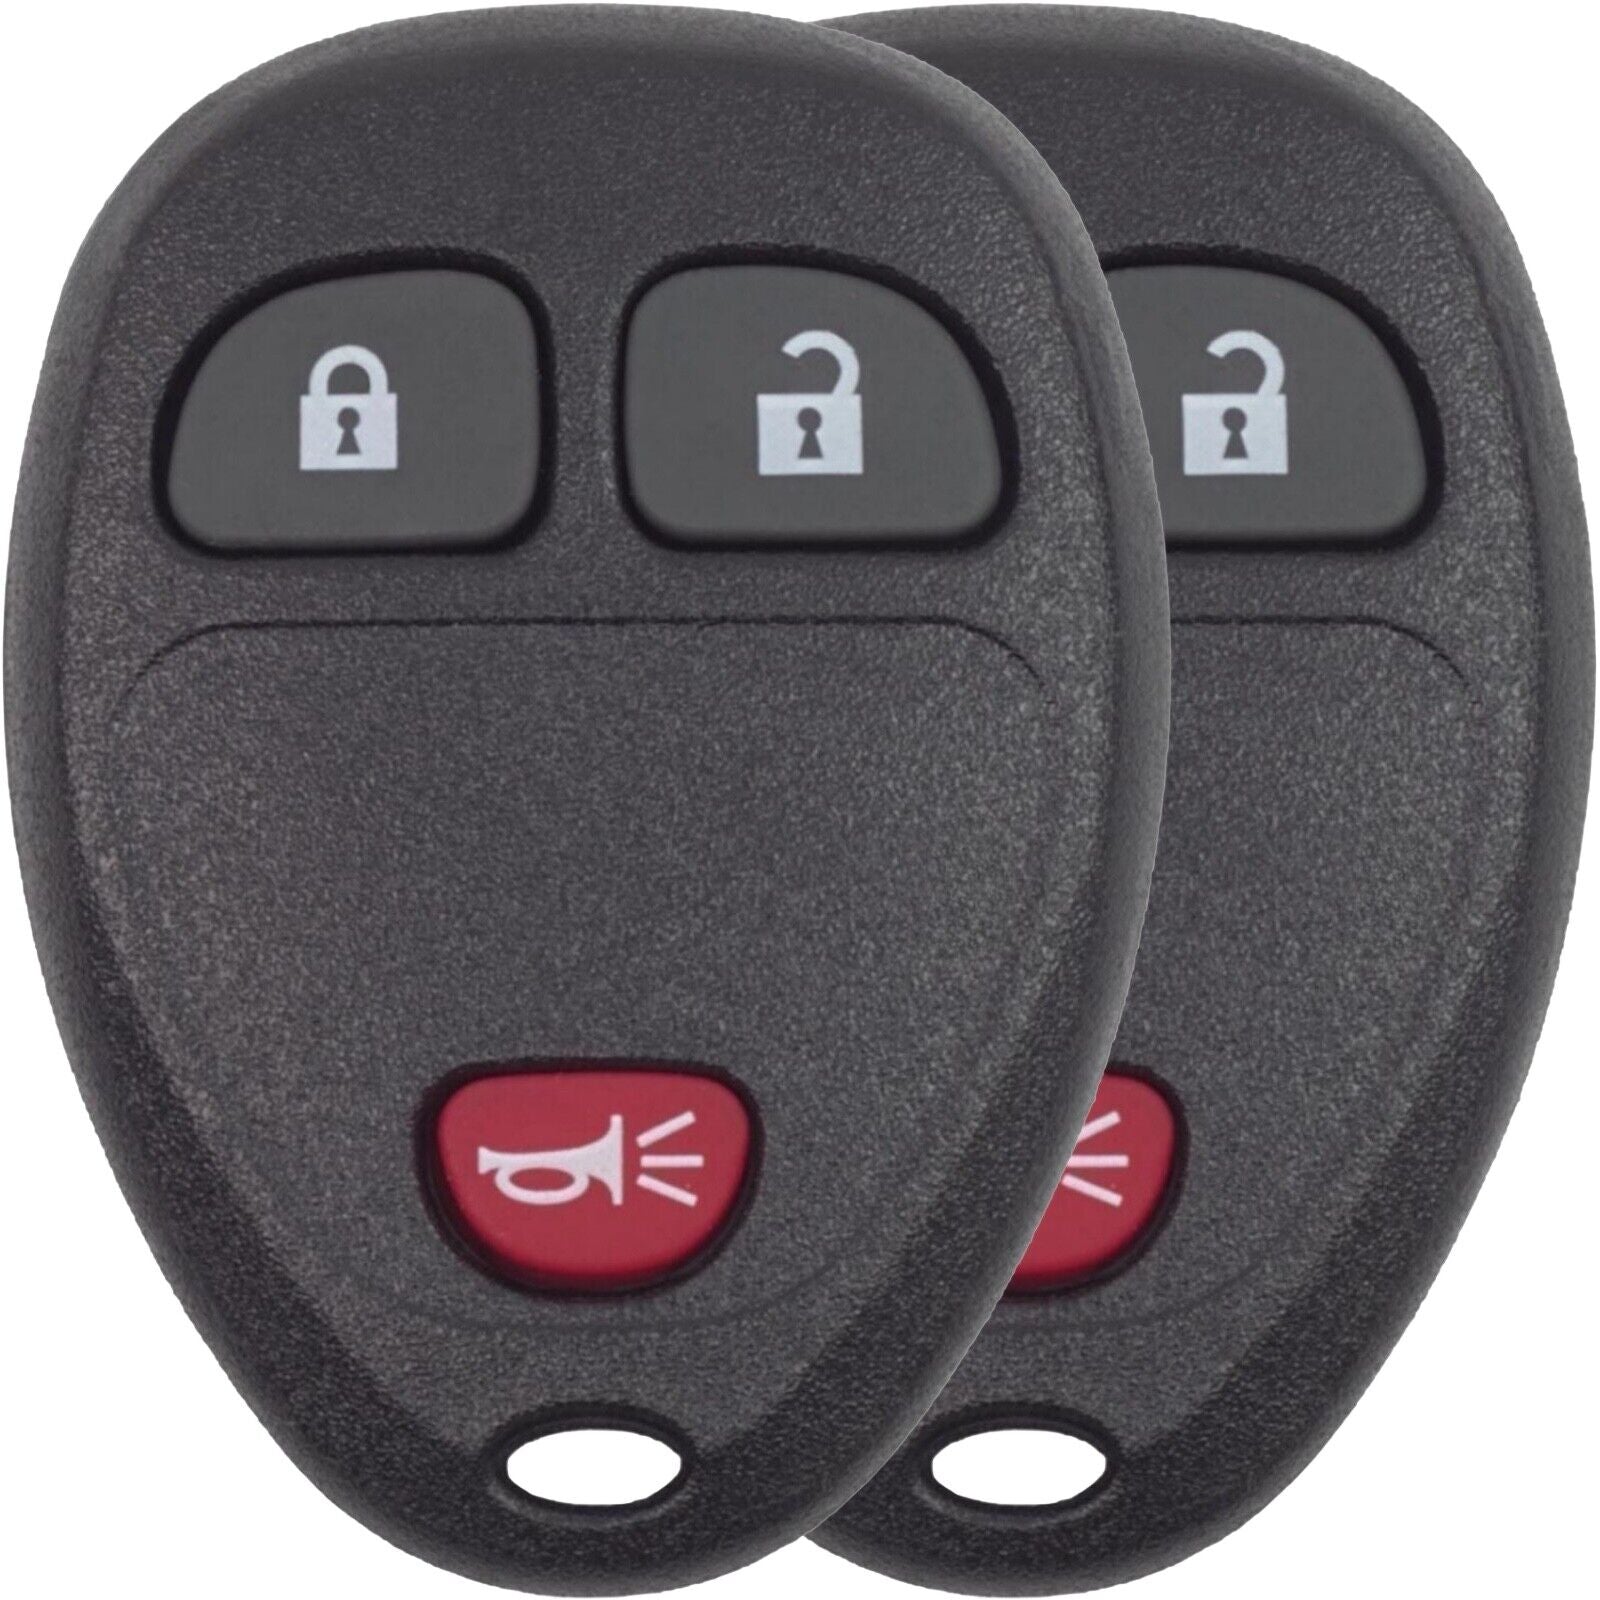 Key Fob Replacement For 2005-2008 Chevrolet Uplander FCC ID: KOBGT04A